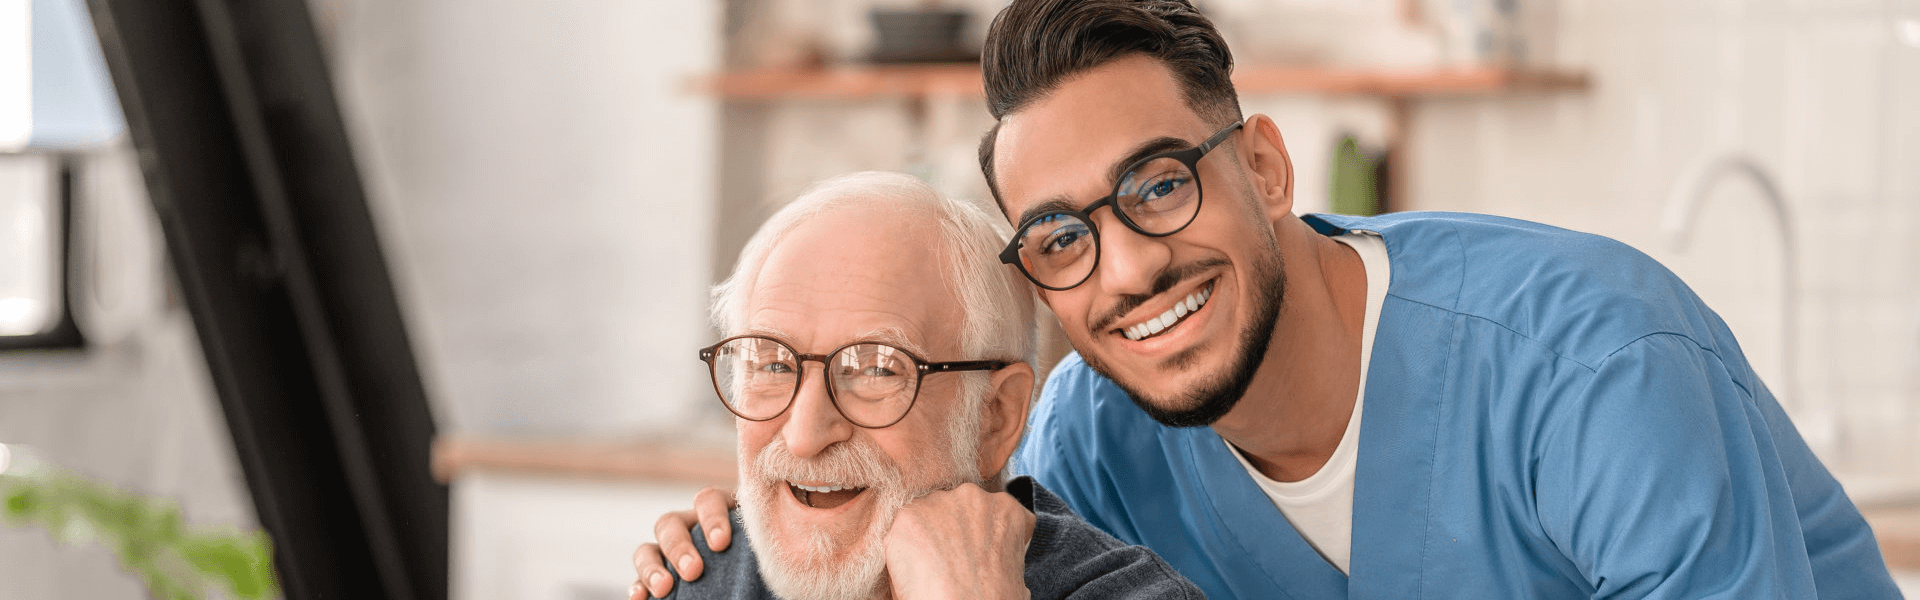 male caregiver and elderly smiling happily